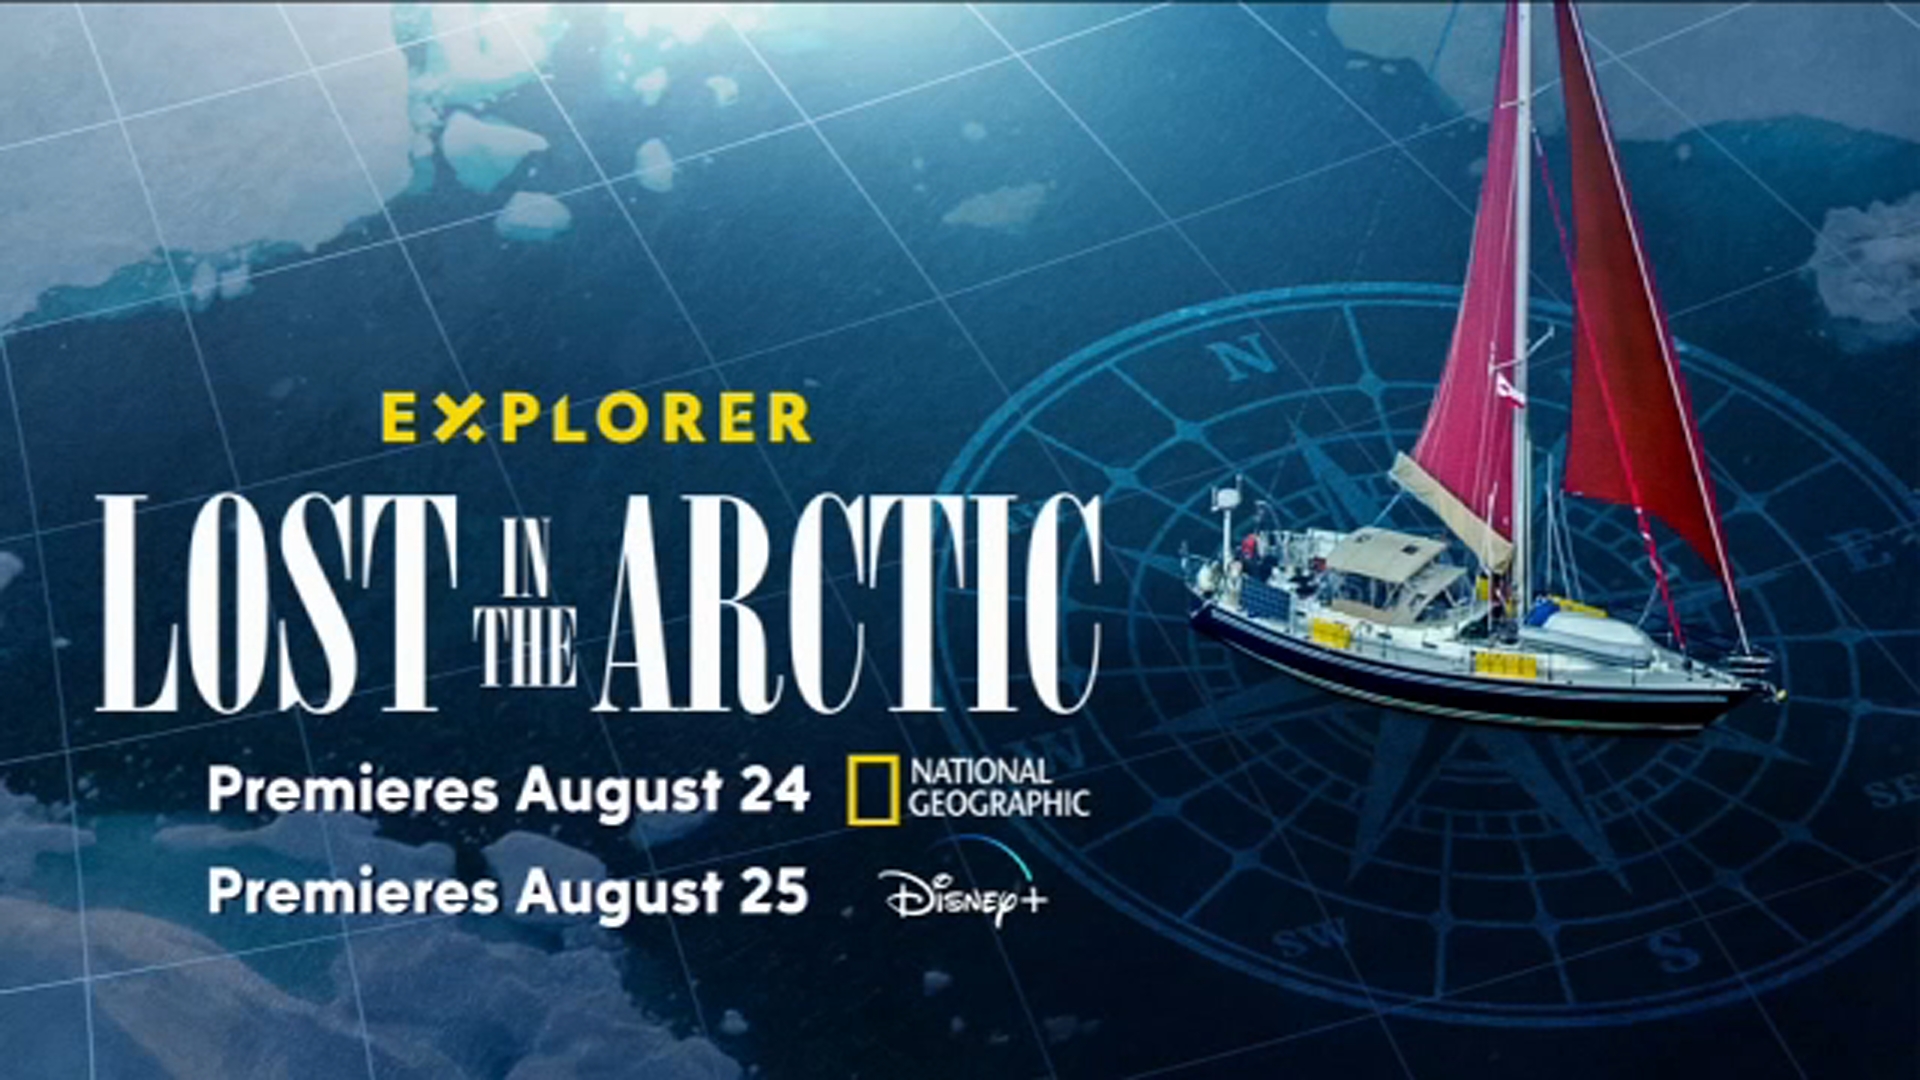 National Geographic film 'Lost in the Arctic' revisits Northwest Passage  explorations - ABC7 New York